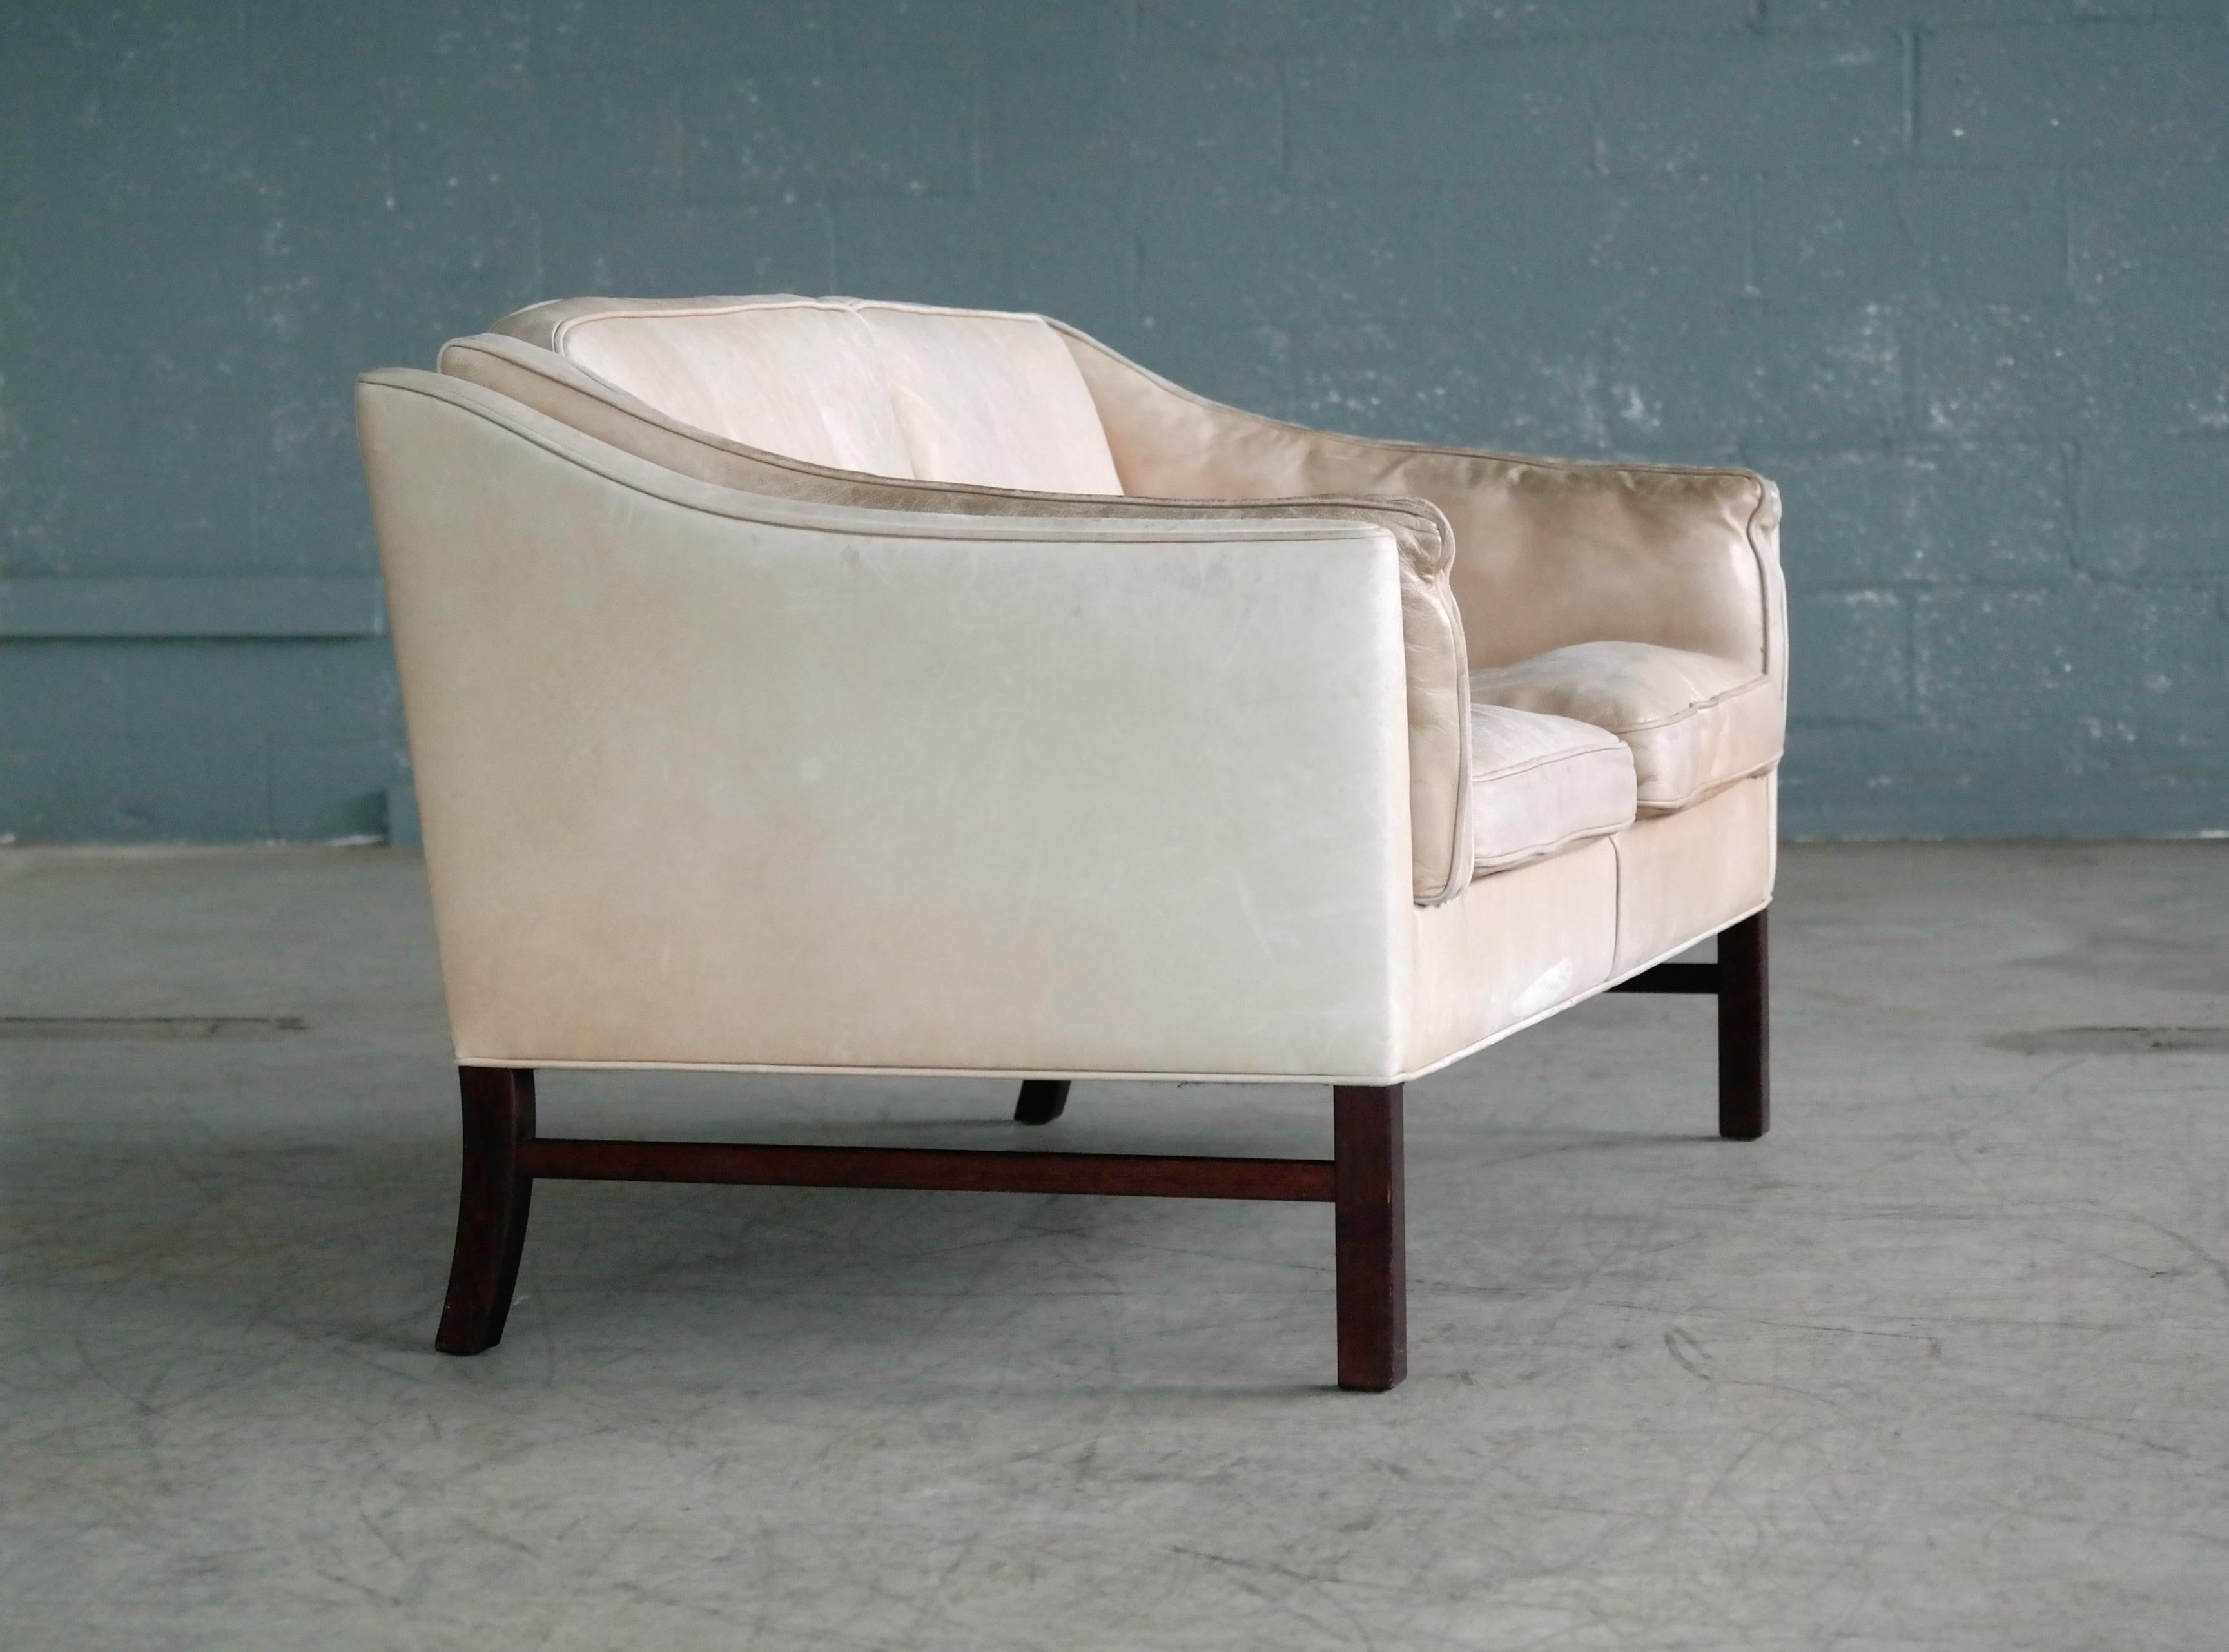 Danish Midcentury Illum Wikkelso Attributed, Two-Seat Sofa in Worn Tan Leather 1